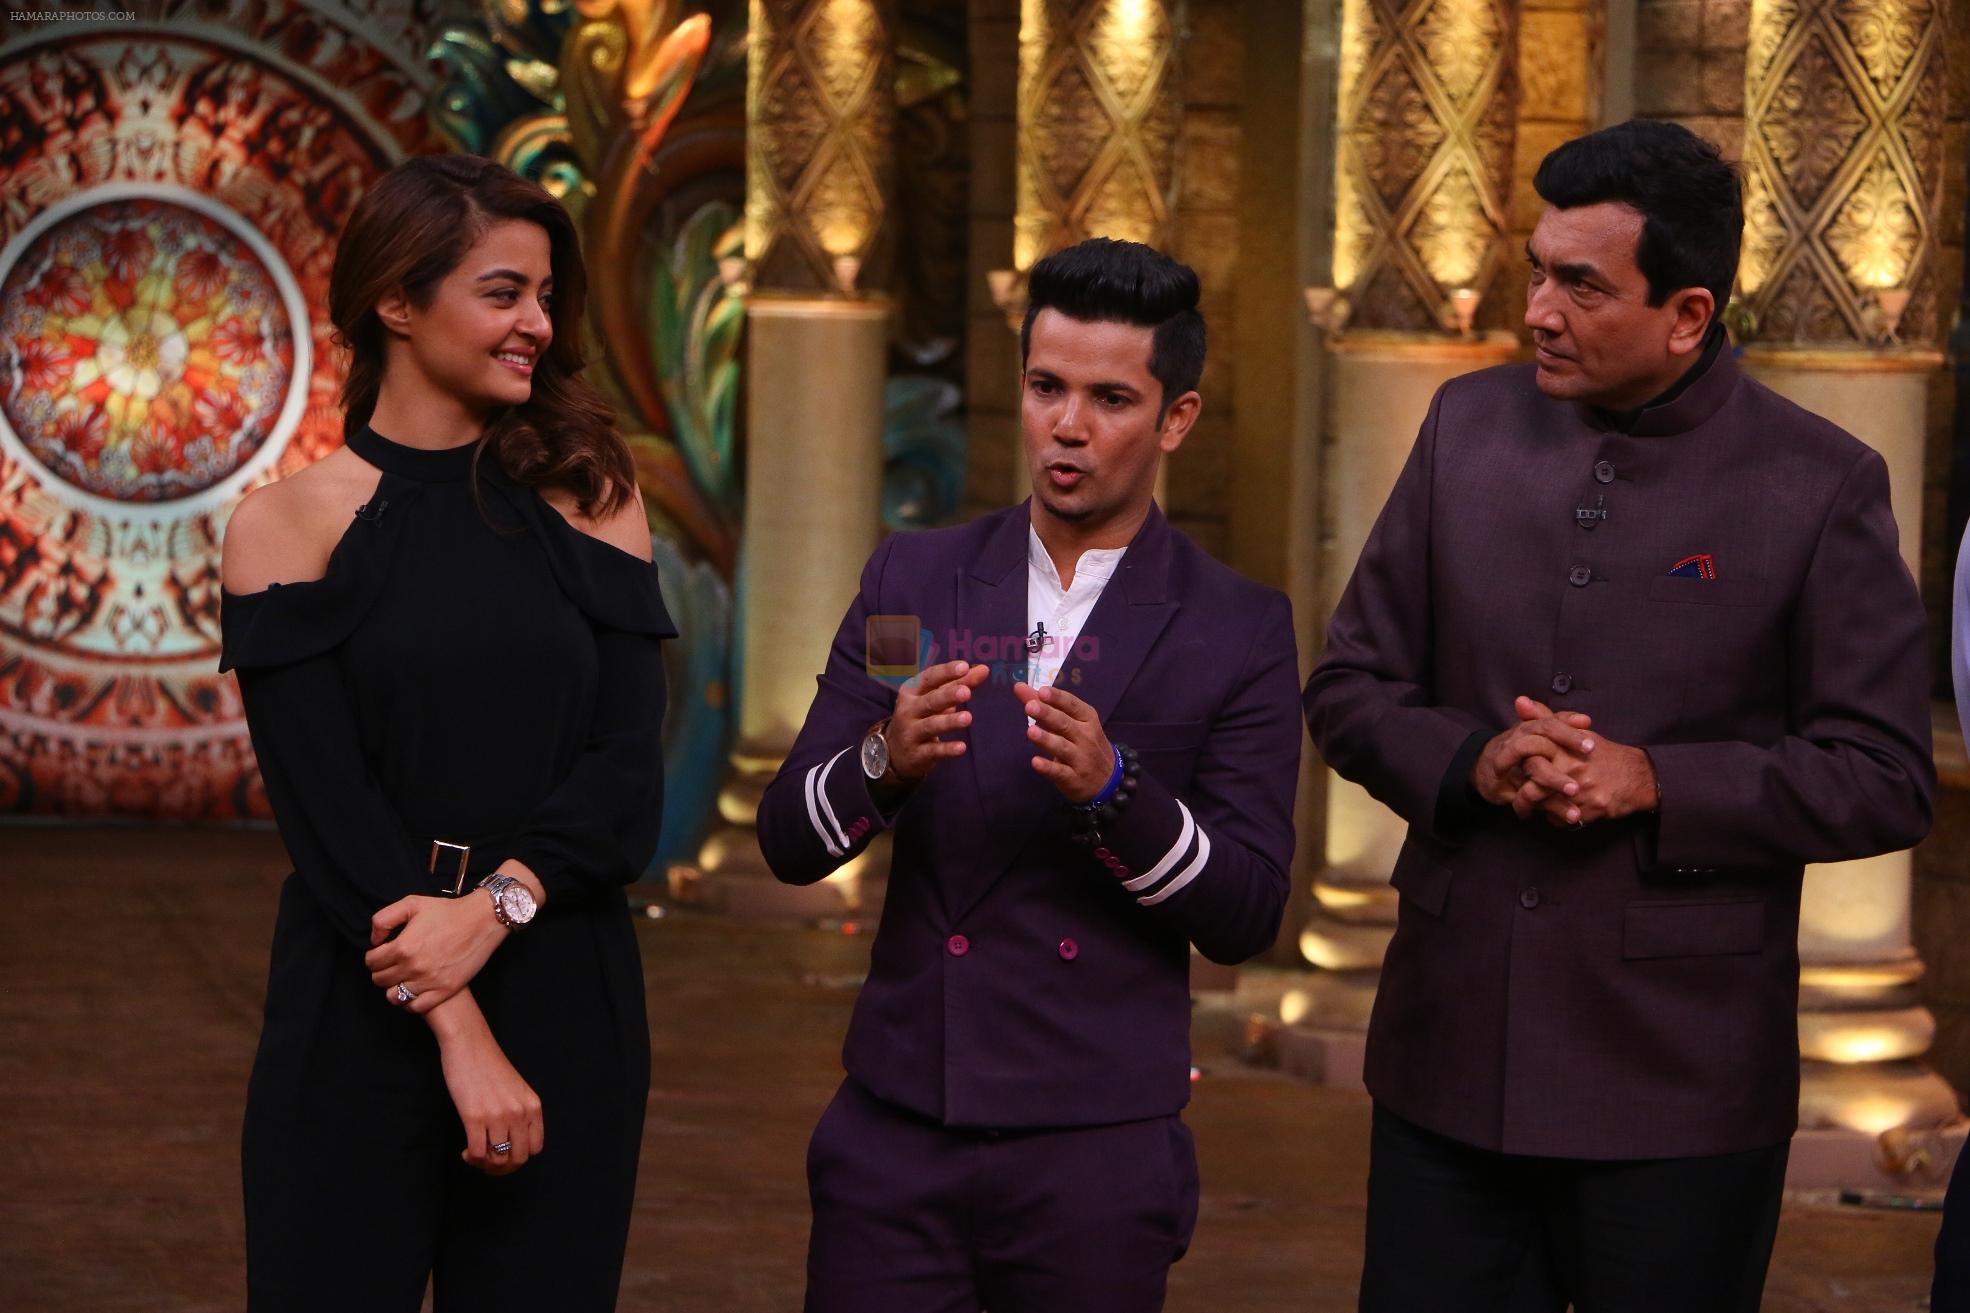 Sanjeev Kapoor, Surveen Chawla and Mudassar Khan grace the stage of COmedy Nights Bachao Taaza